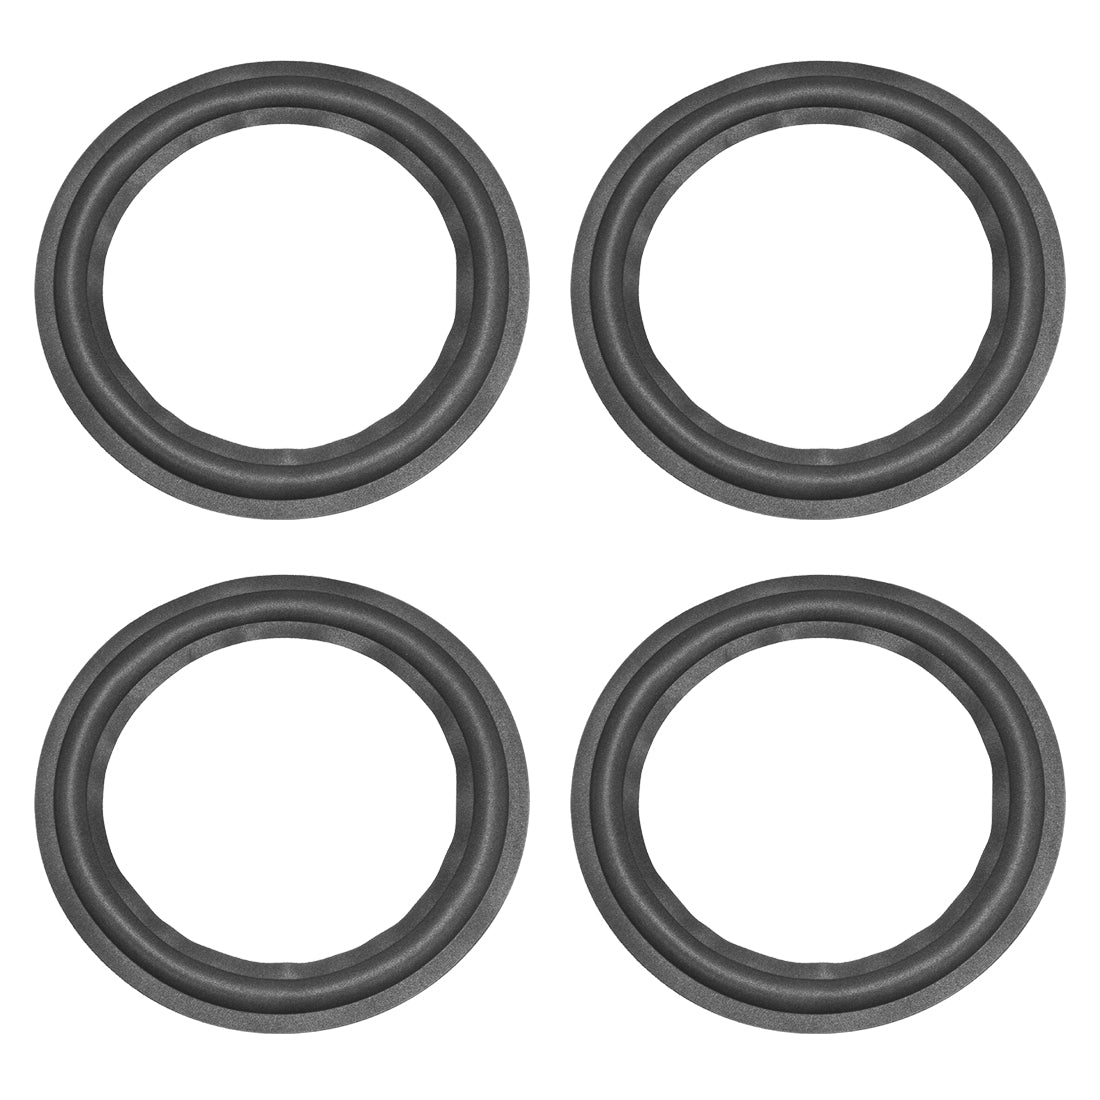 uxcell Uxcell 10" 10 Inch Speaker Foam Edge Surround Rings Replacement Parts for Speaker Repair or DIY 4pcs